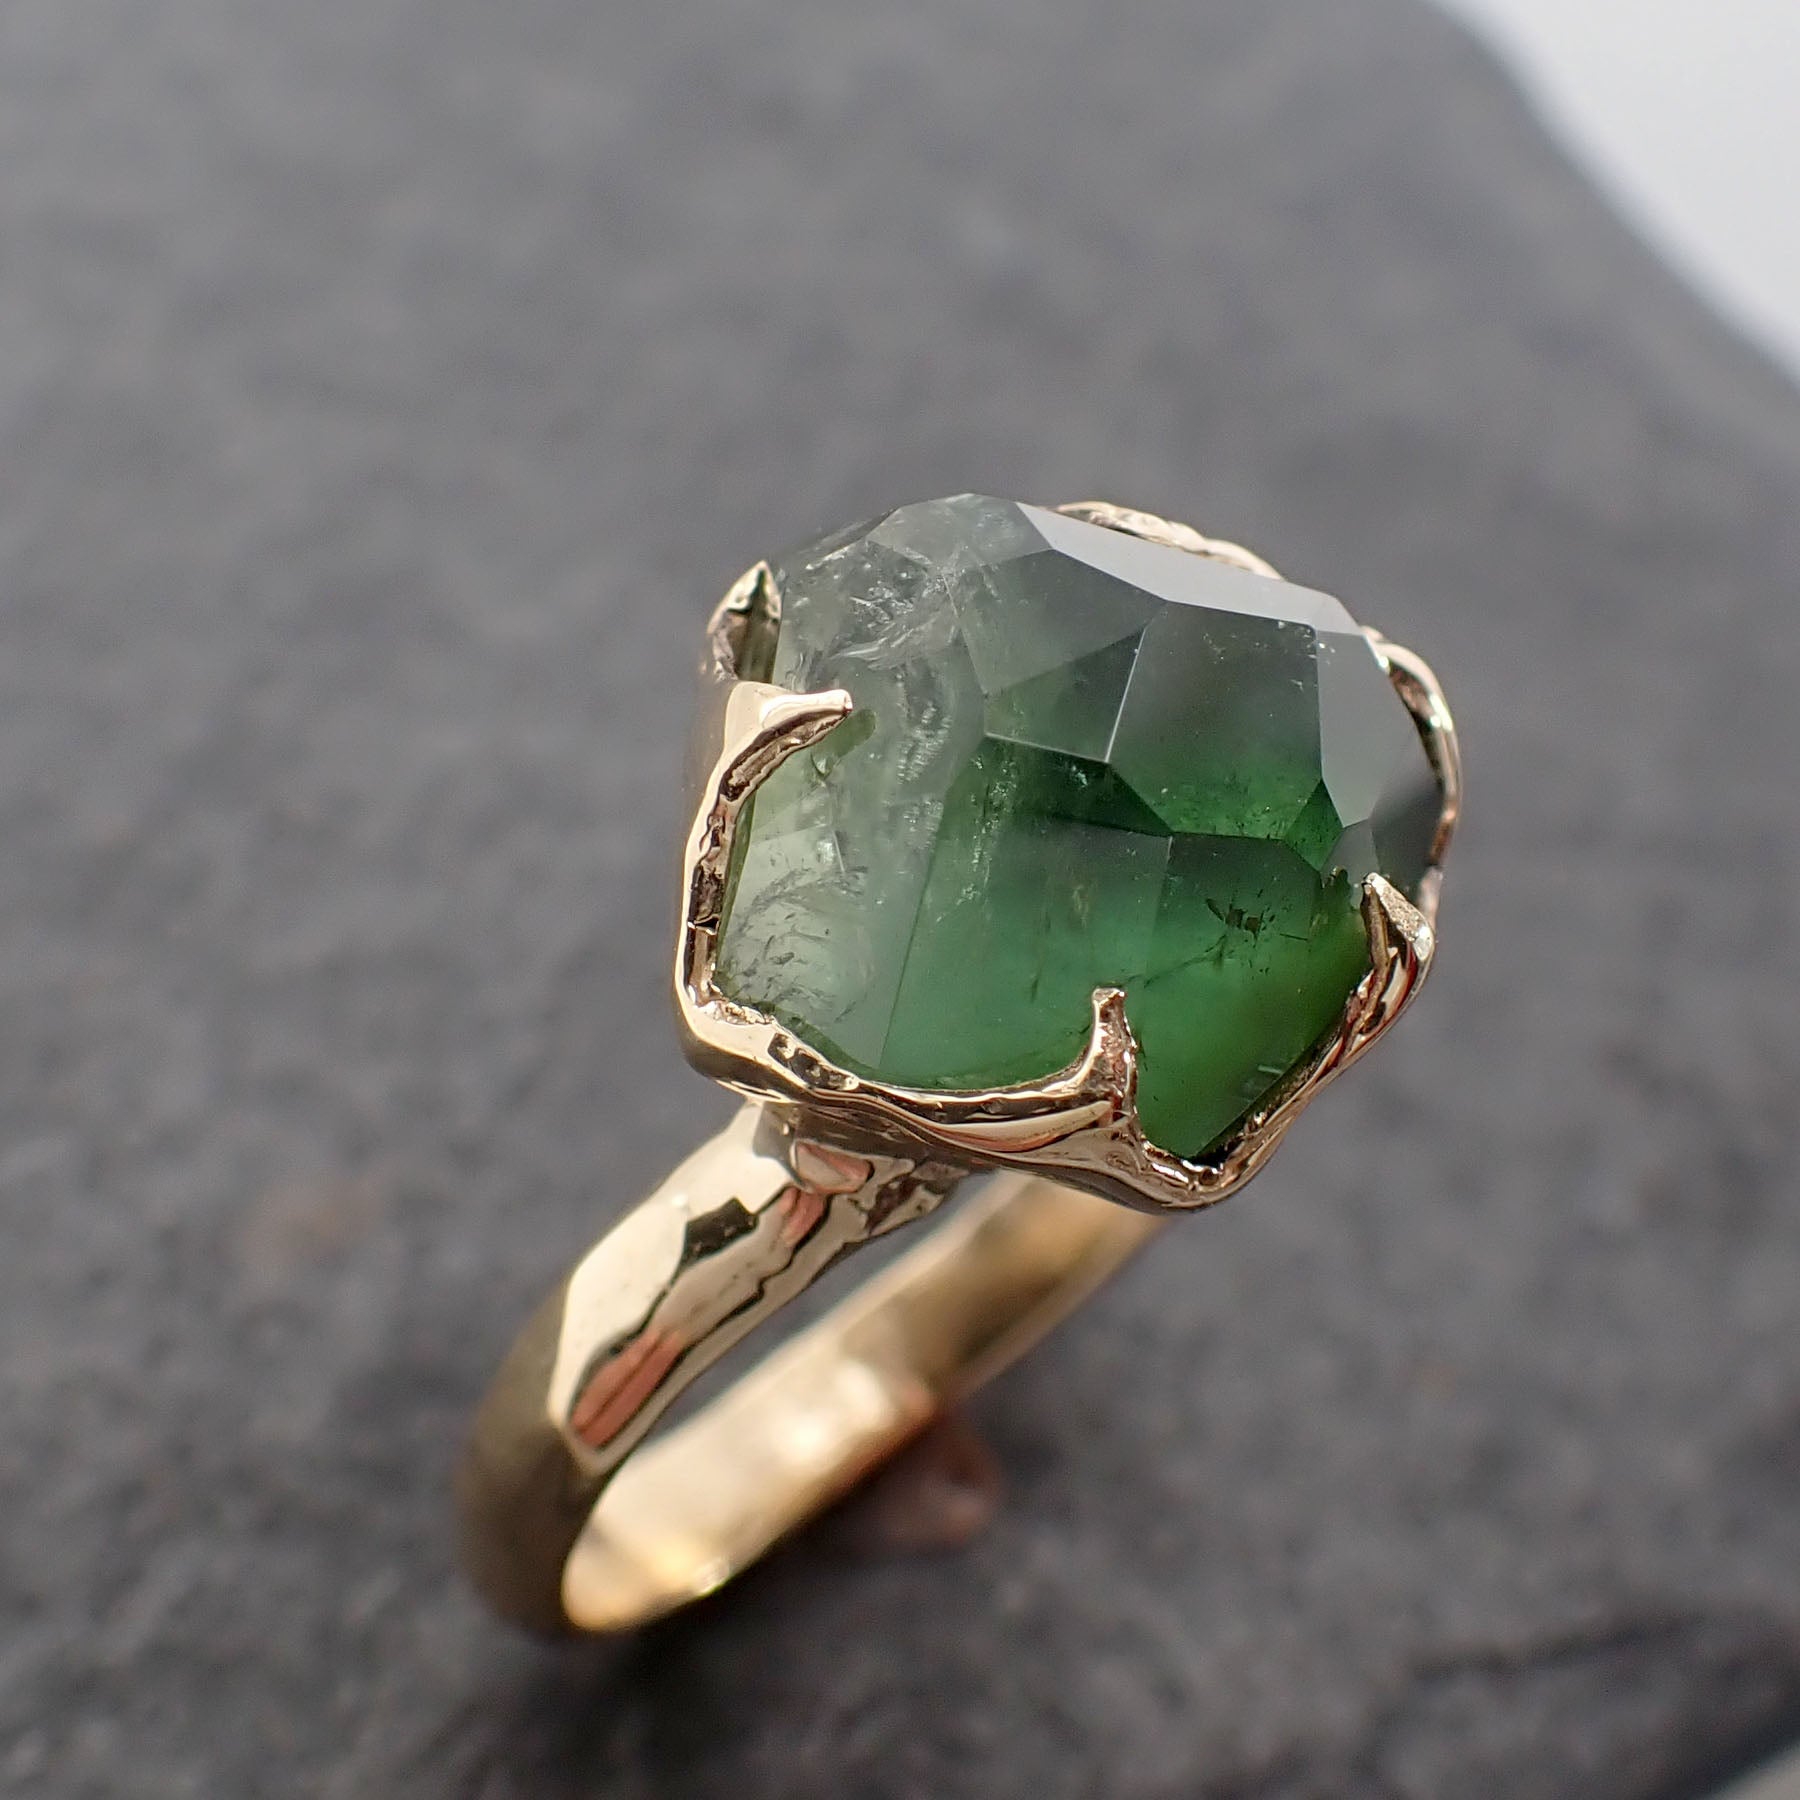 Partially faceted Solitaire Green Tourmaline 18k Yellow Gold Engagement Ring One Of a Kind Gemstone Ring byAngeline 2527